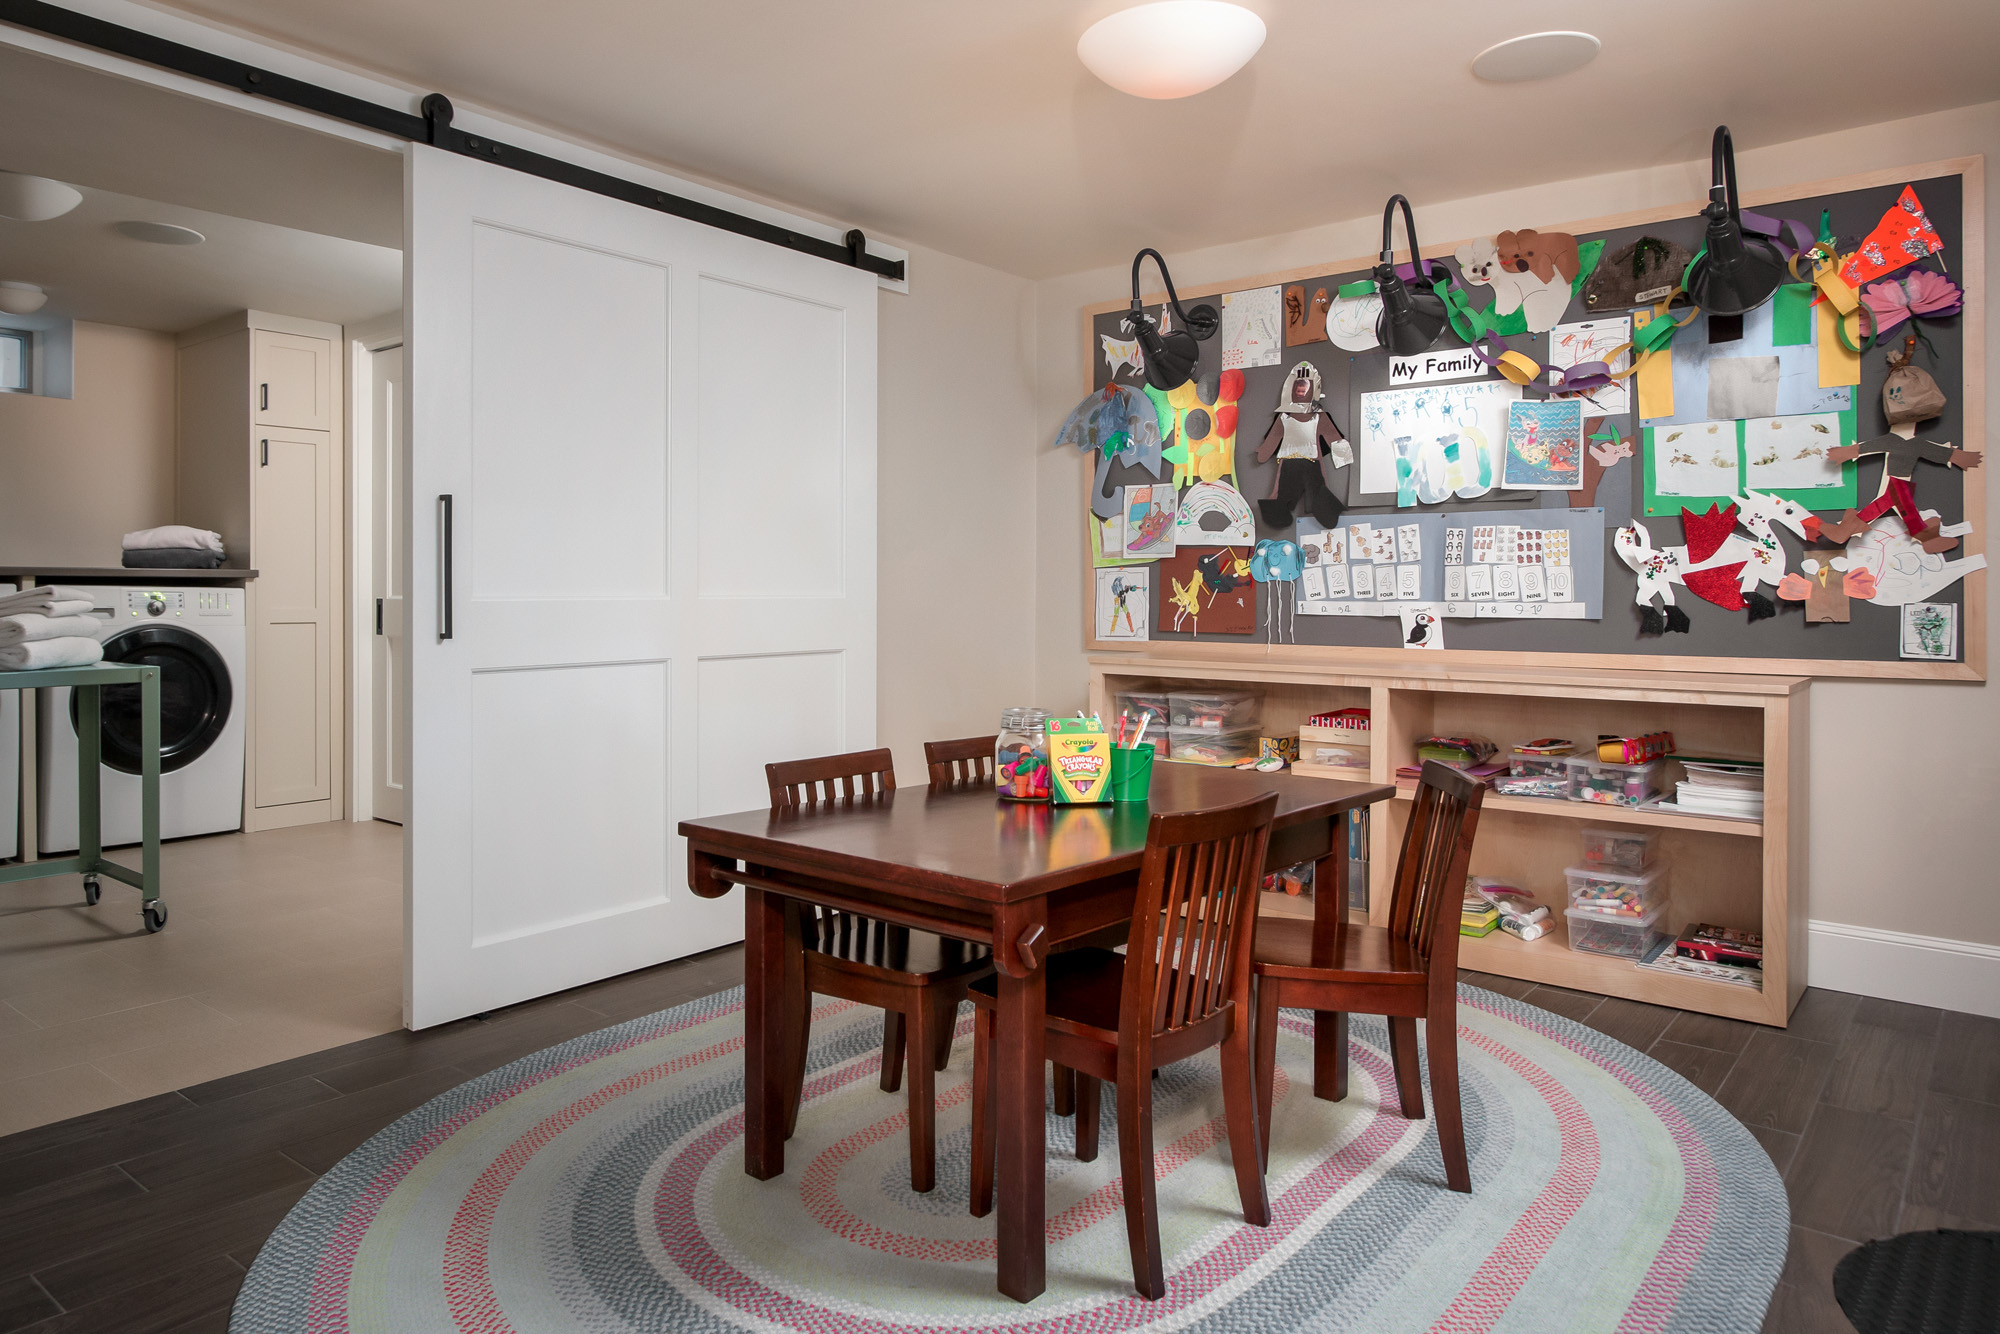 11-KitchenVisions-Other-Spaces-Basement-Playroom-Newton.jpg